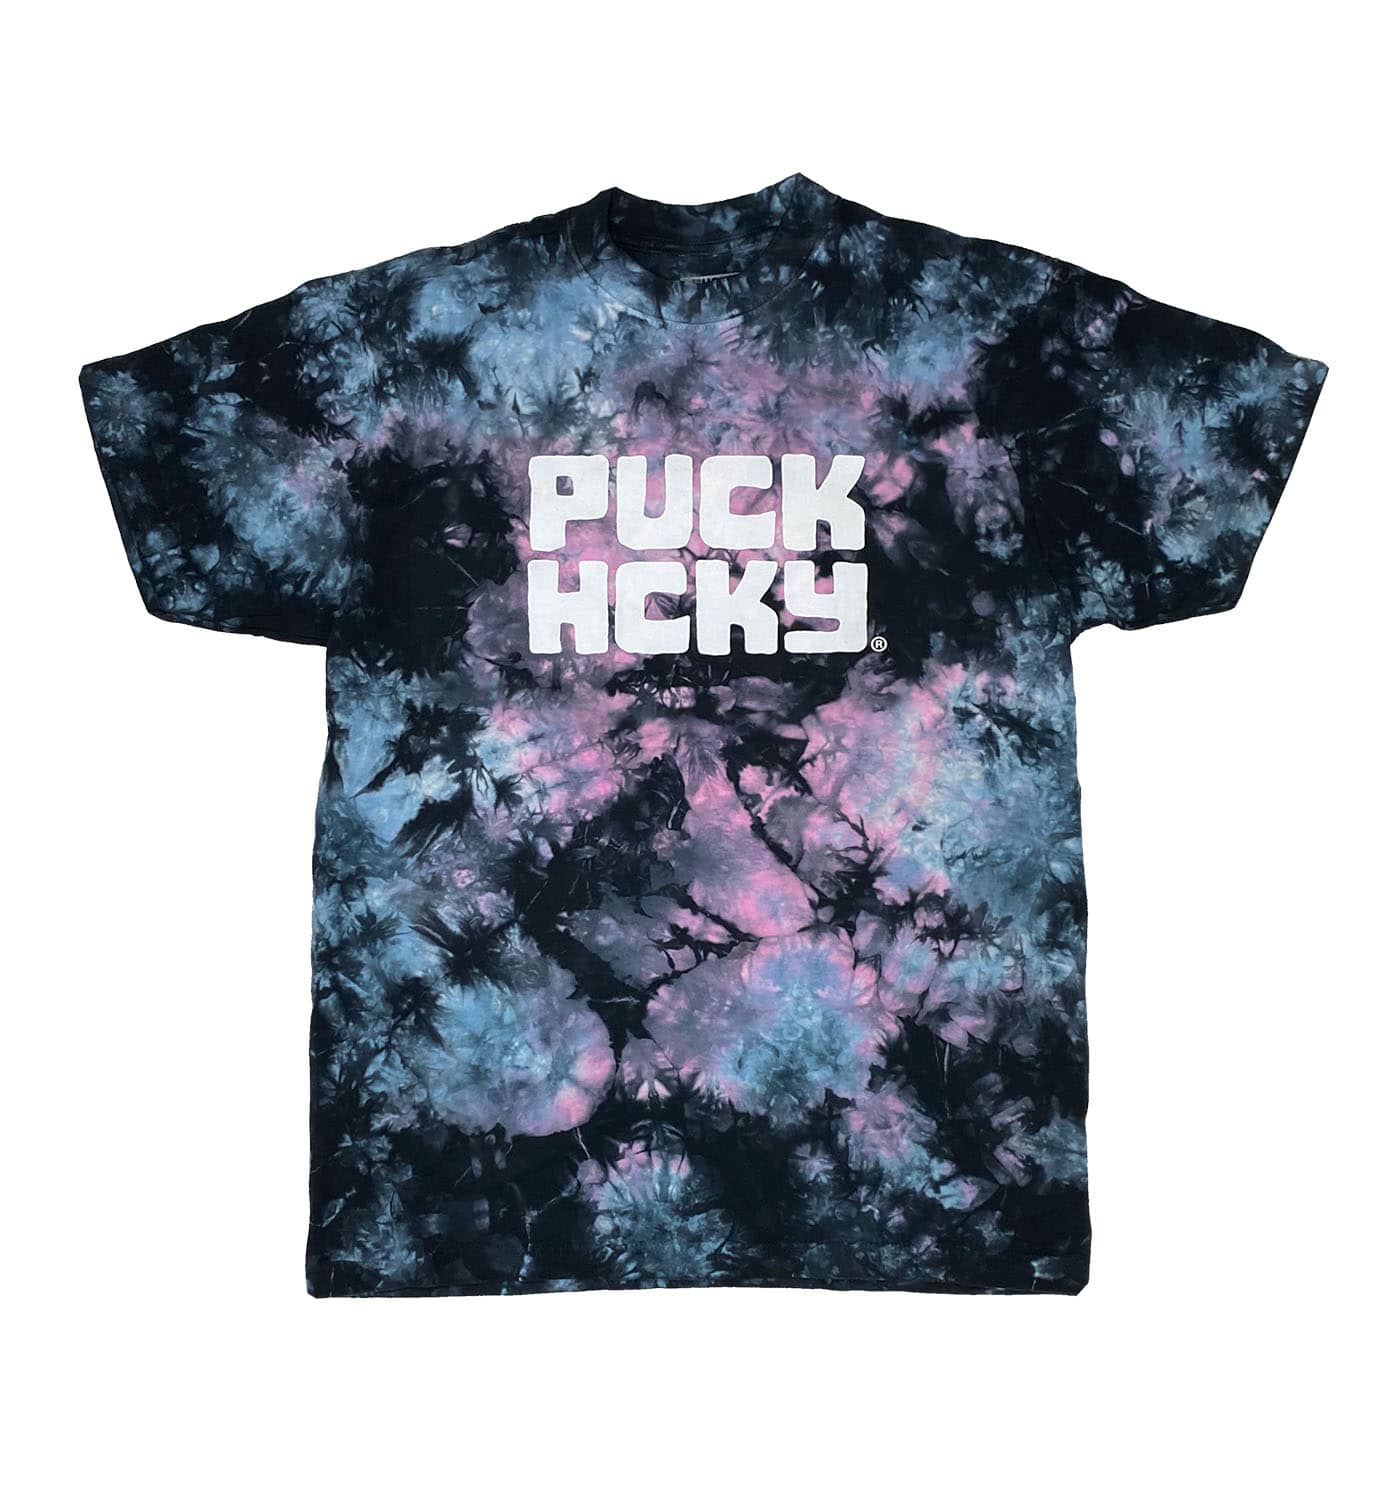 PUCK HCKY 'STACKED' short sleeve tie-dye hockey t-shirt front view